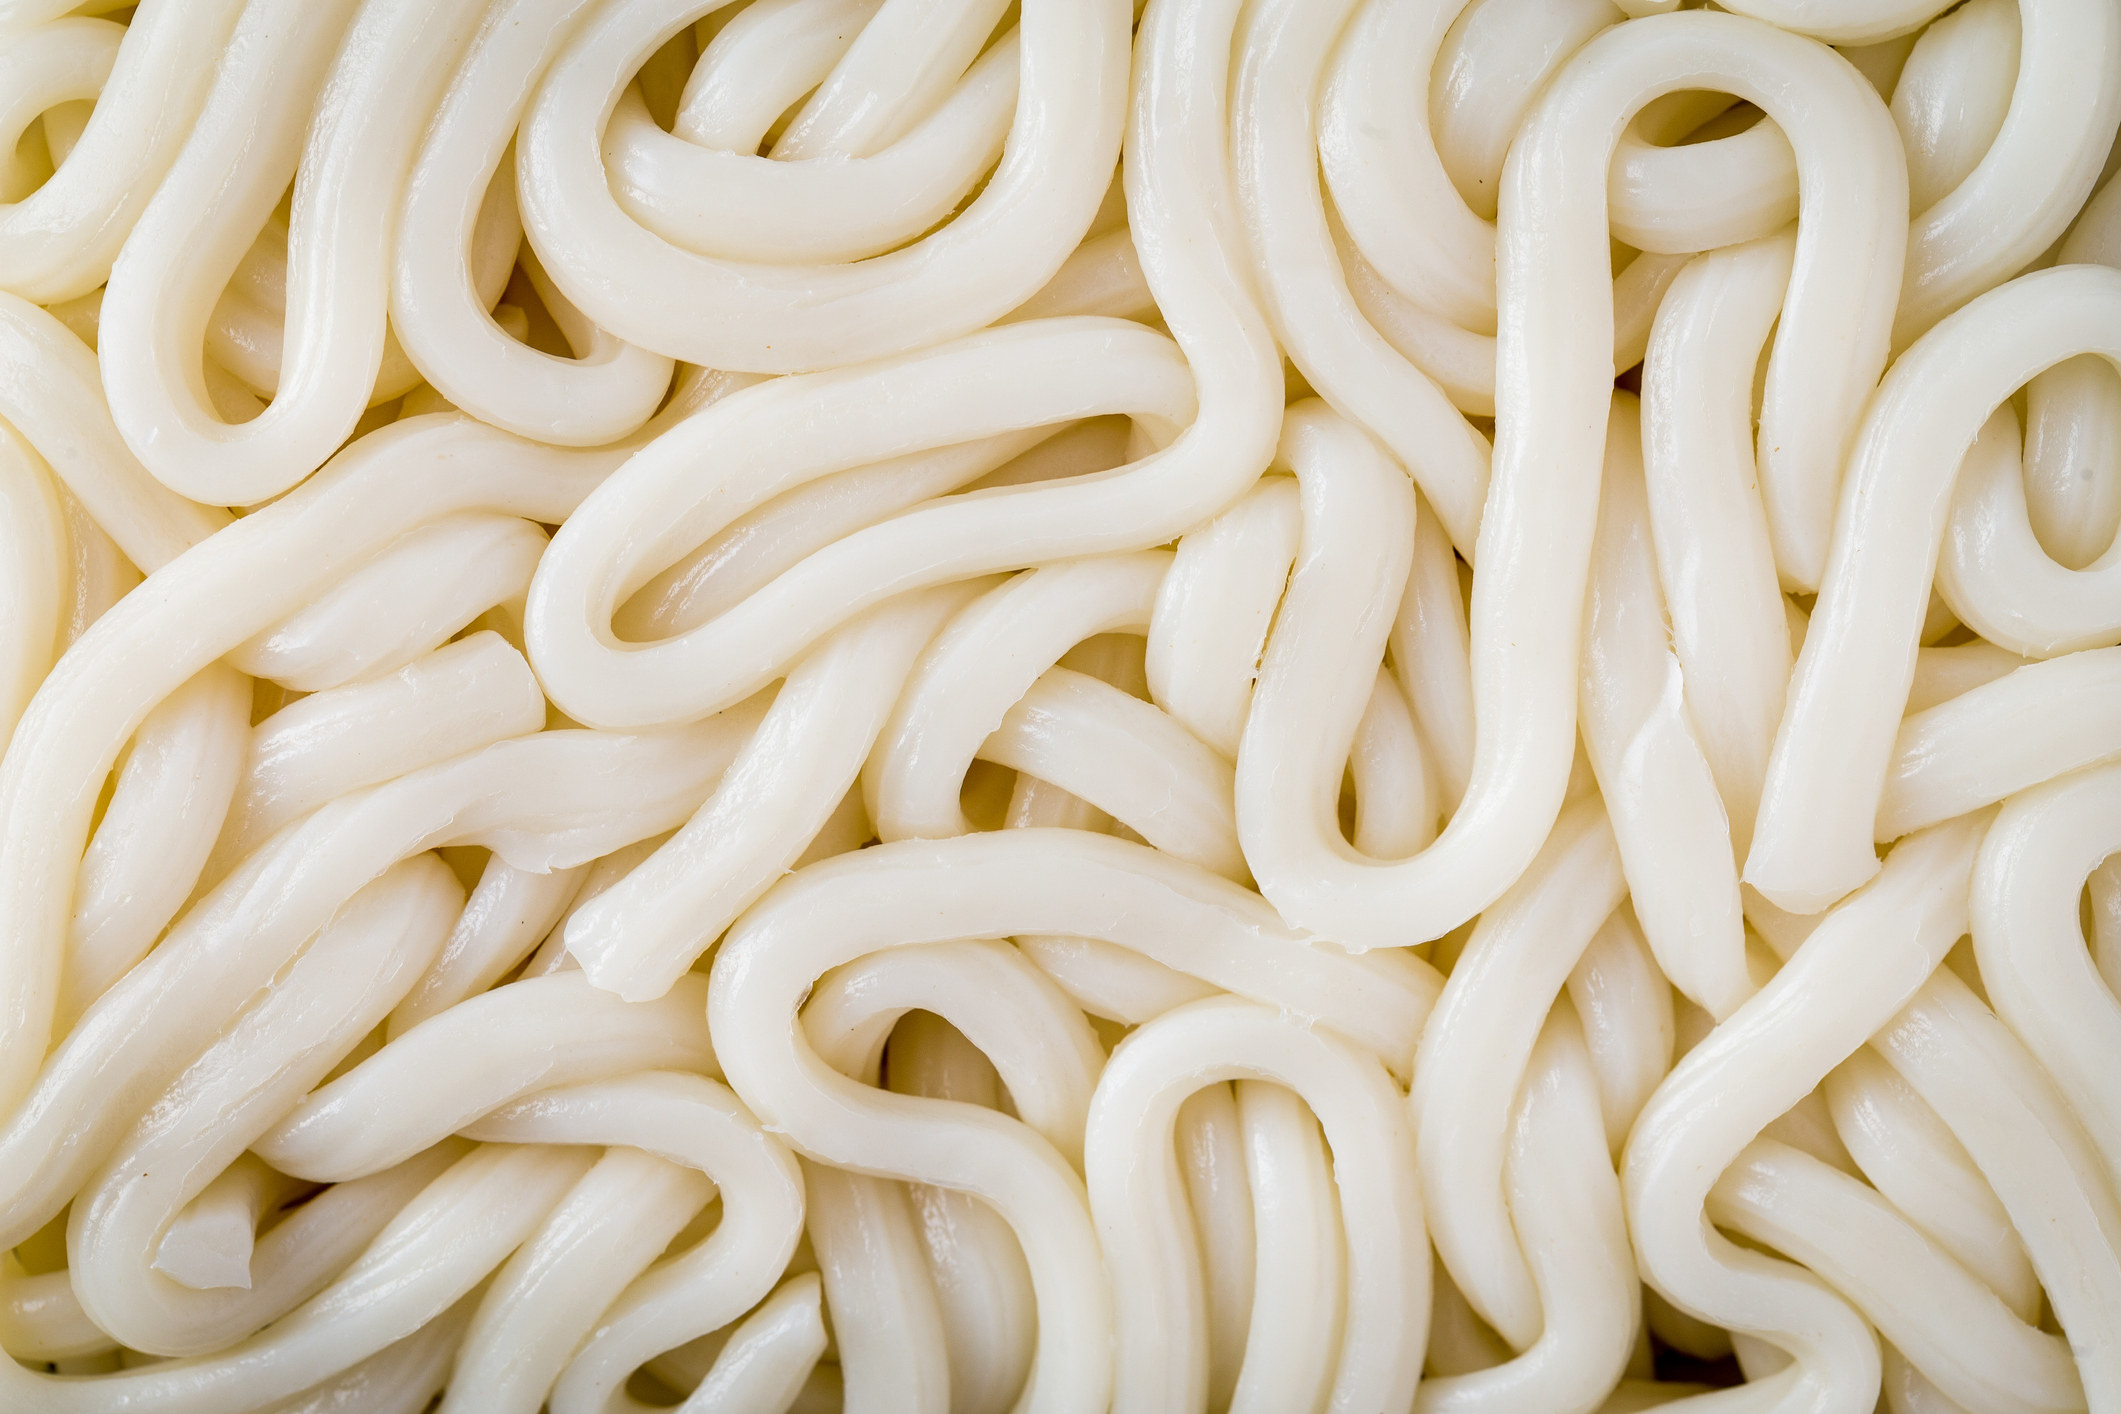 Squiggly-looking noodles packed together